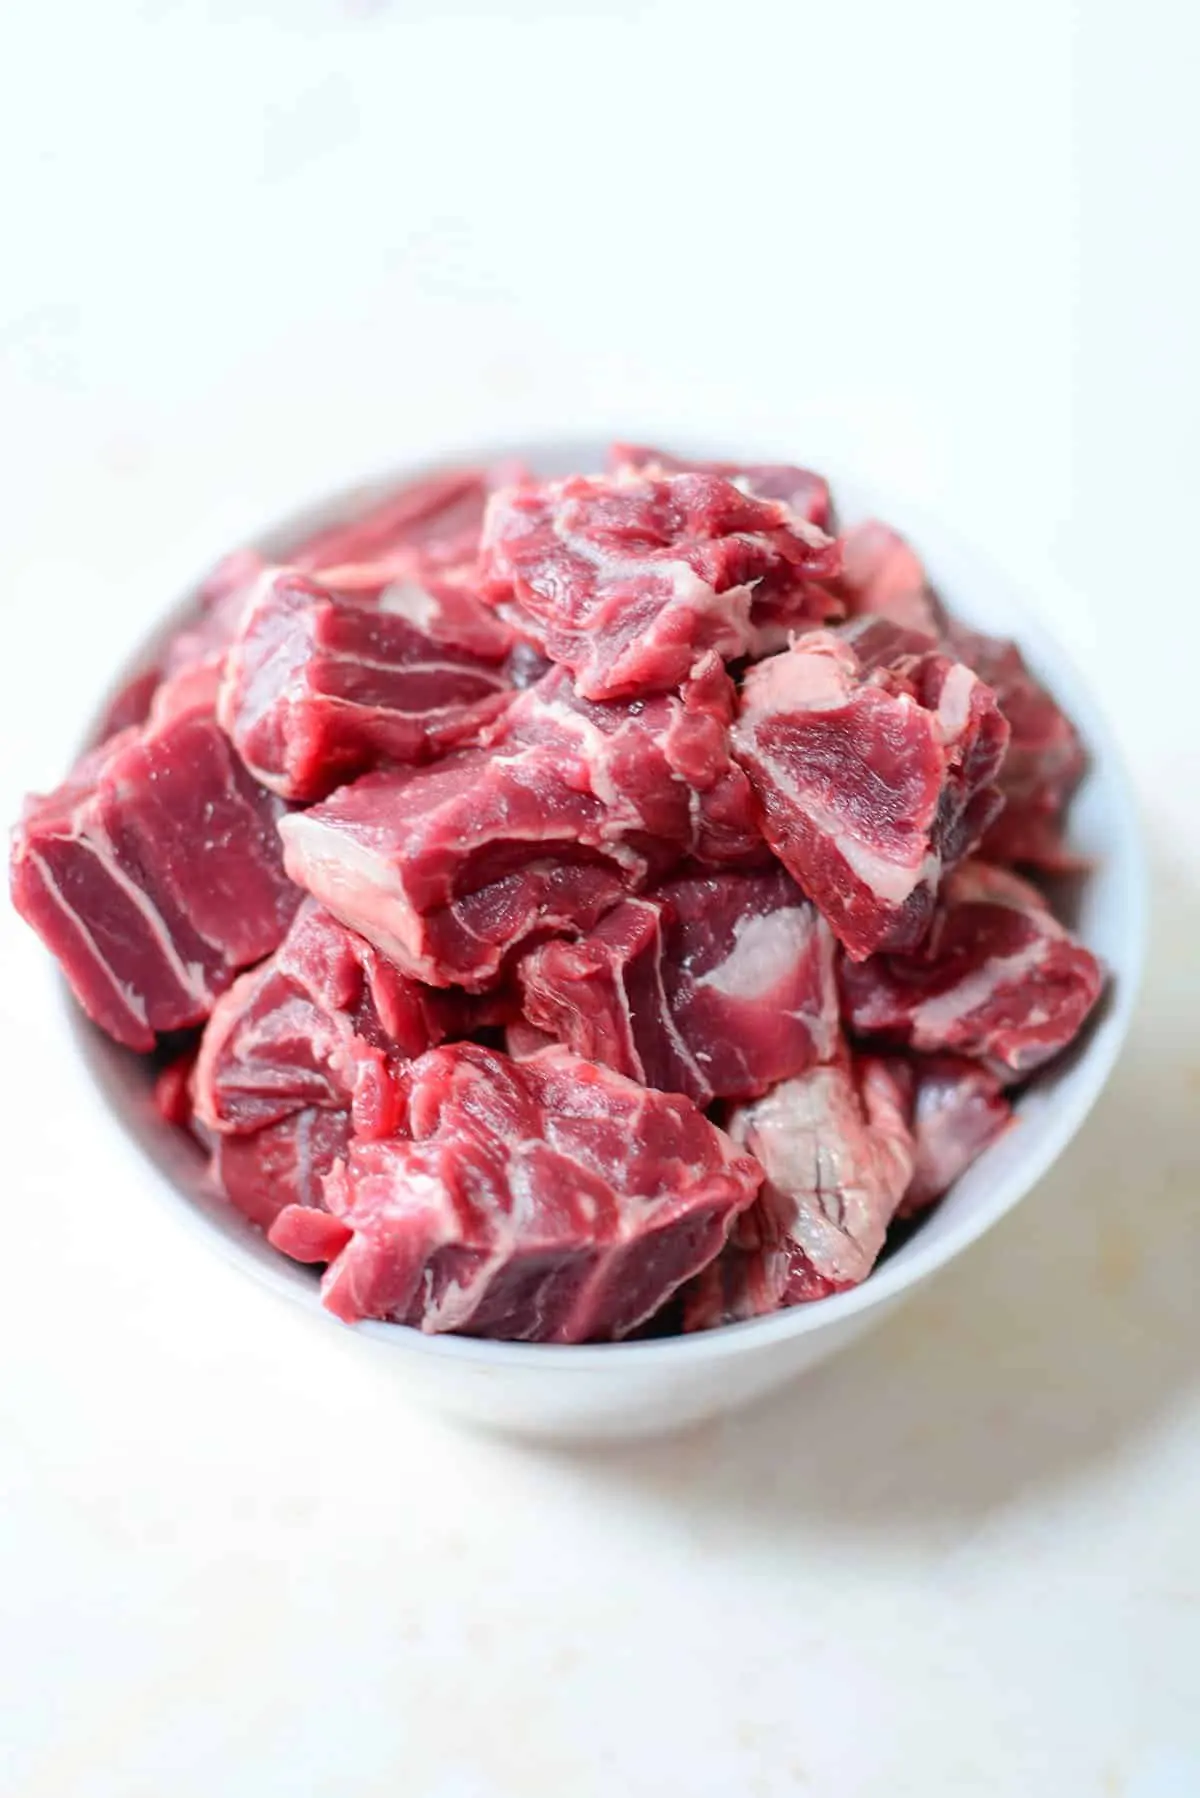 Shank meat cut up and placed in a white bowl. 